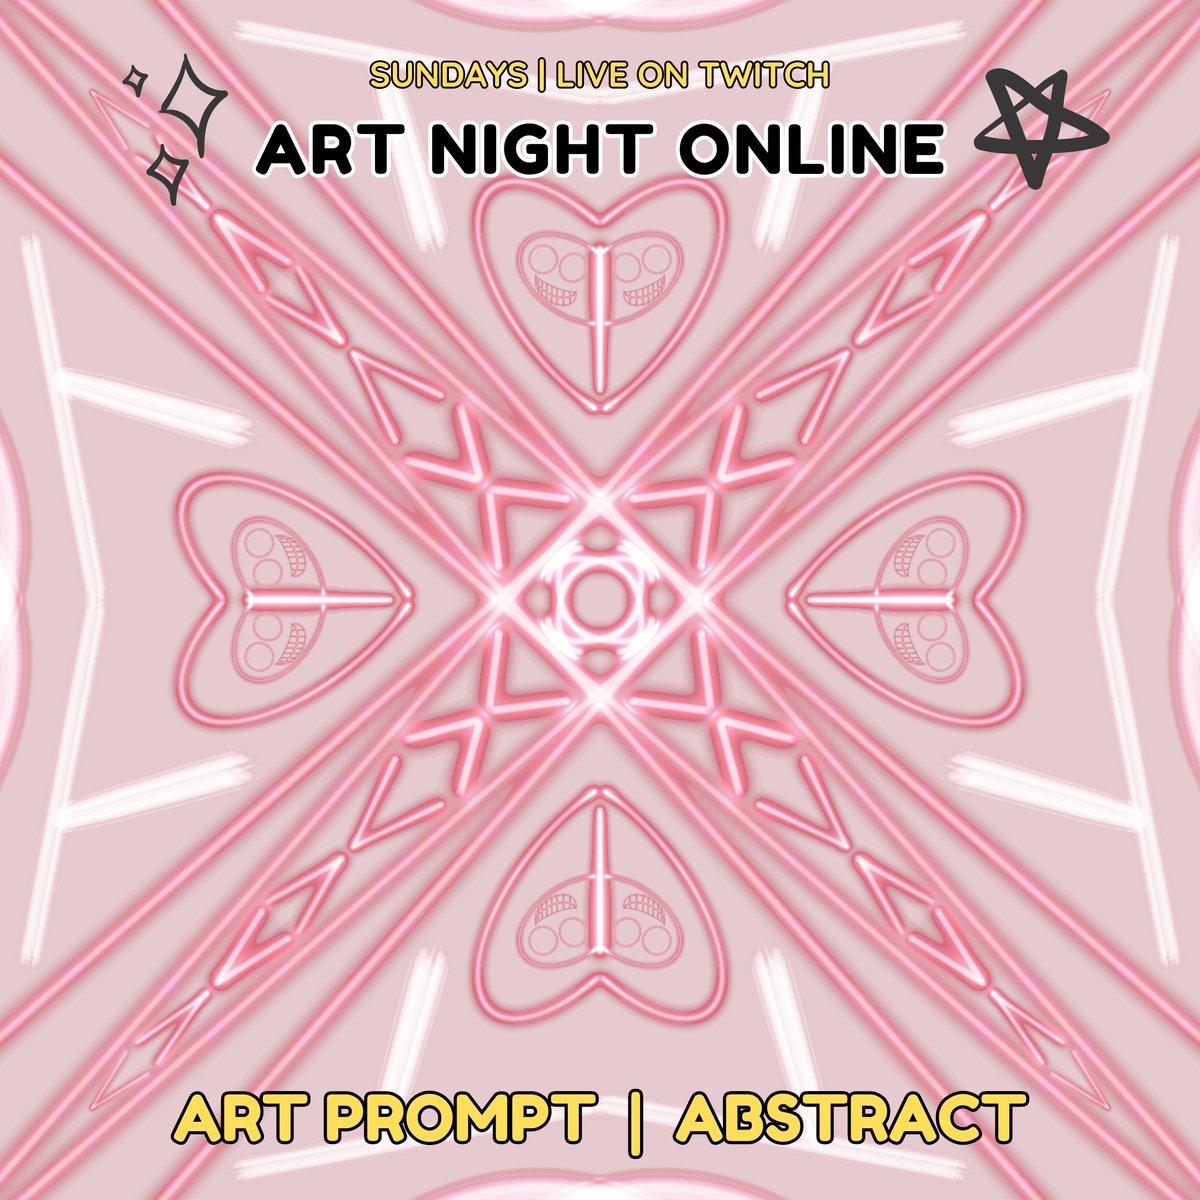 It's Sunday so we play #tunes and make #art! Join us on #Twitch NOW! Today your prompt is #Abstract! Art by the amazing Klutzy_Crafts and #design by 2gether6!

twitch.tv/danielleallard

#SundayVibes #twitchstreamer #twitchmusic #chill #togetherapart #stream #create #artnightonline